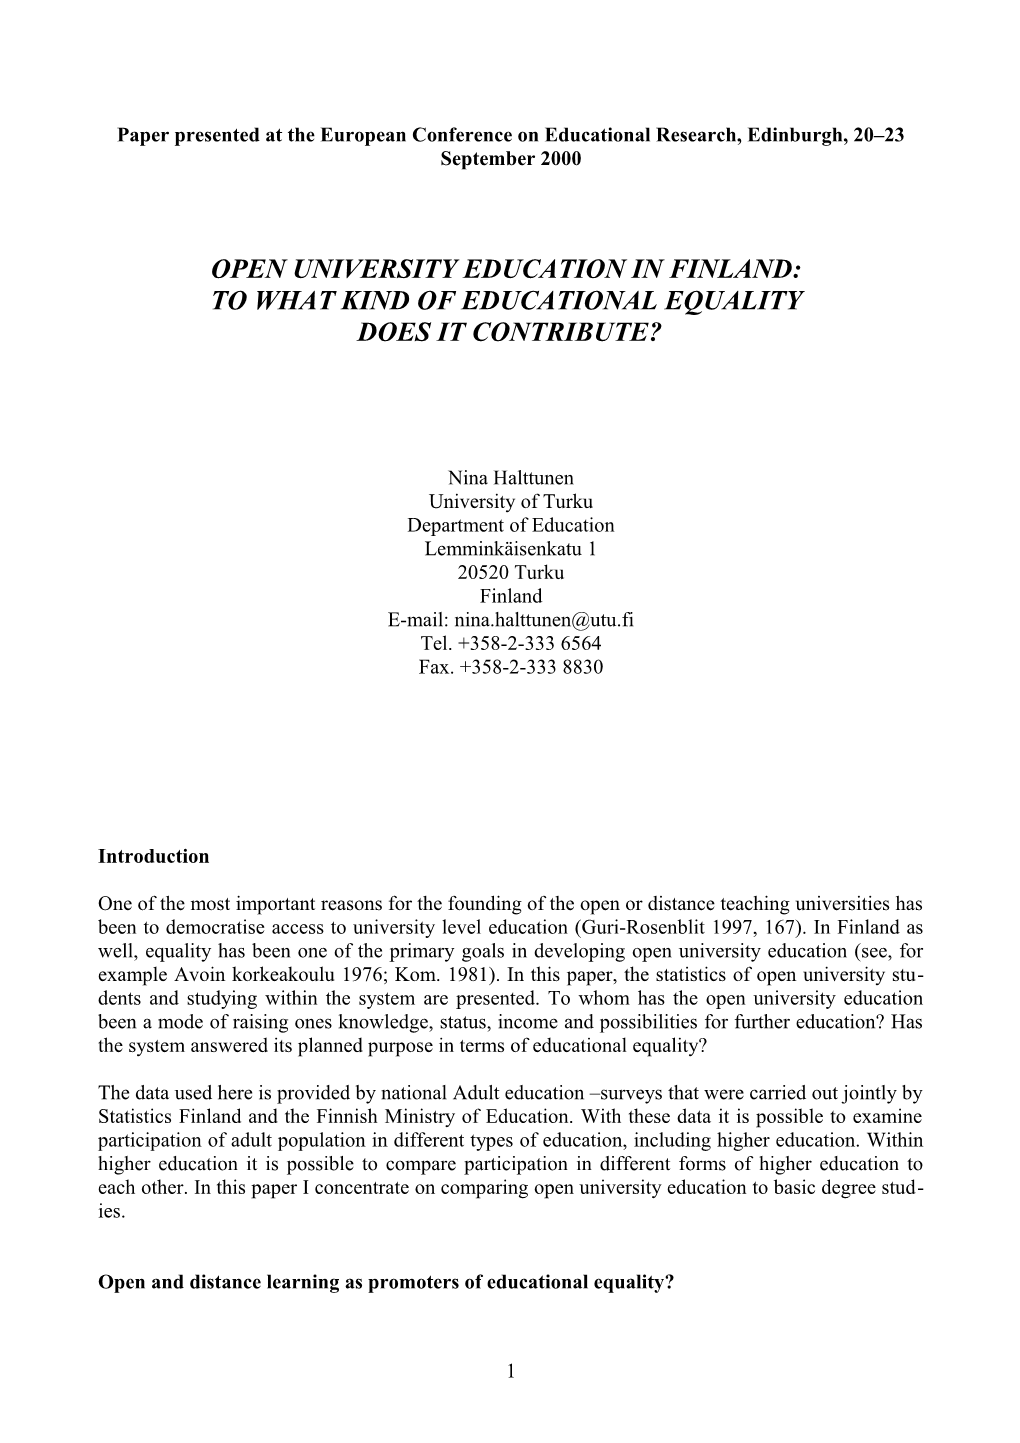 Open University Education in Finland: to What Kind of Educational Equality Does It Contribute